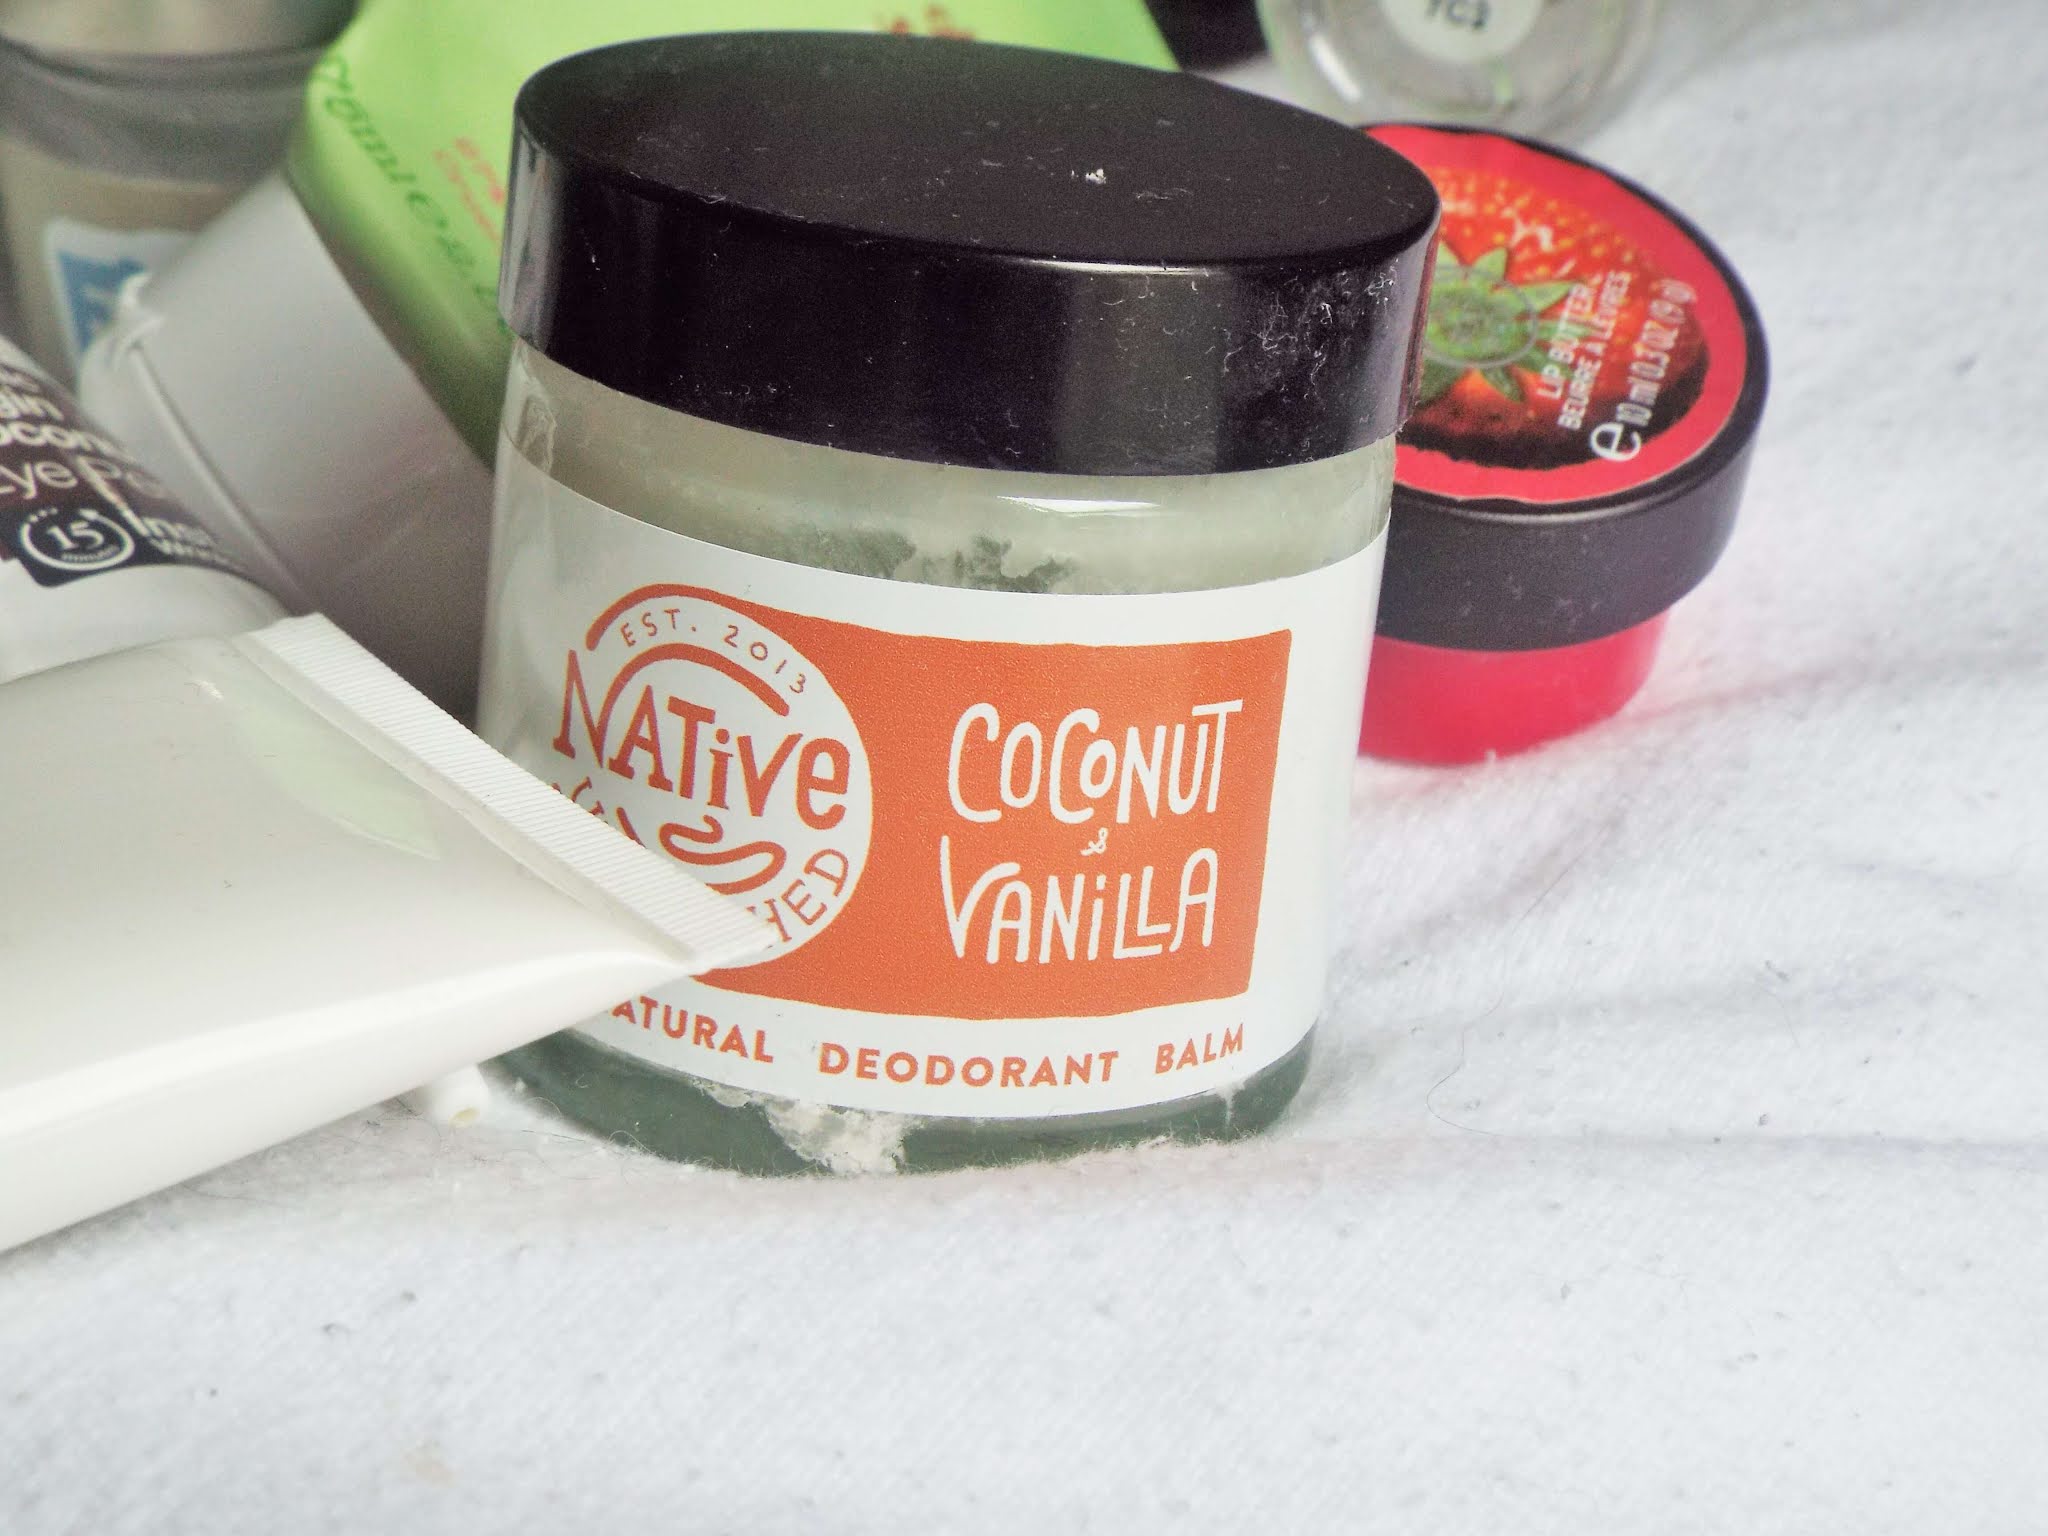 Native Unearthed Natural Deodorant Balm Coconut & Vanilla, packaged in glass jar, with black plastic screw on lid.